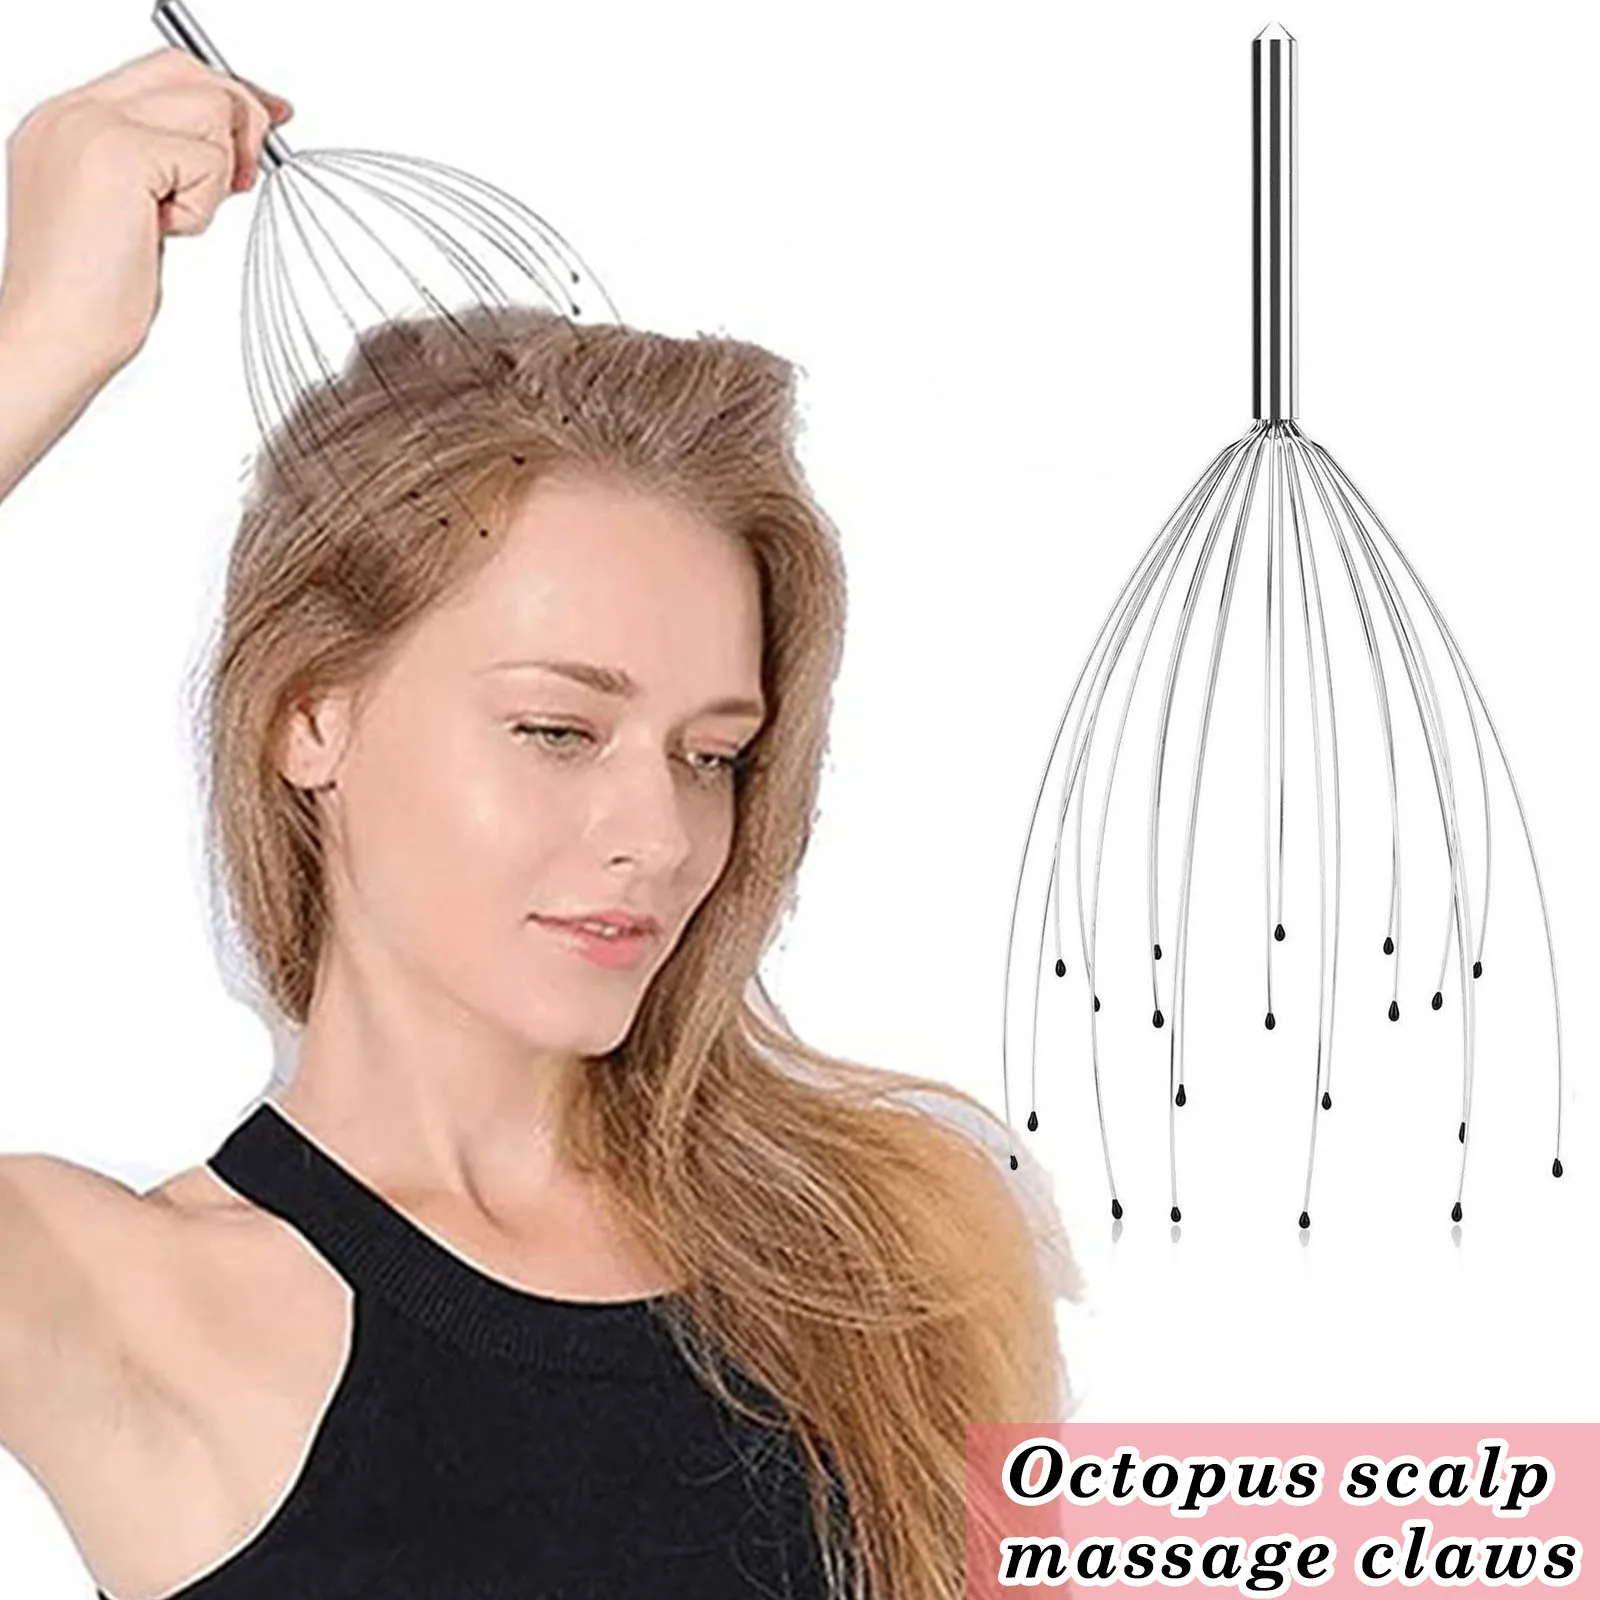 Scalp Massagers With 20 Claws Handheld Head Massage Scratcher For Deep Relaxation Hair Stimulation And Stress Relief Massage